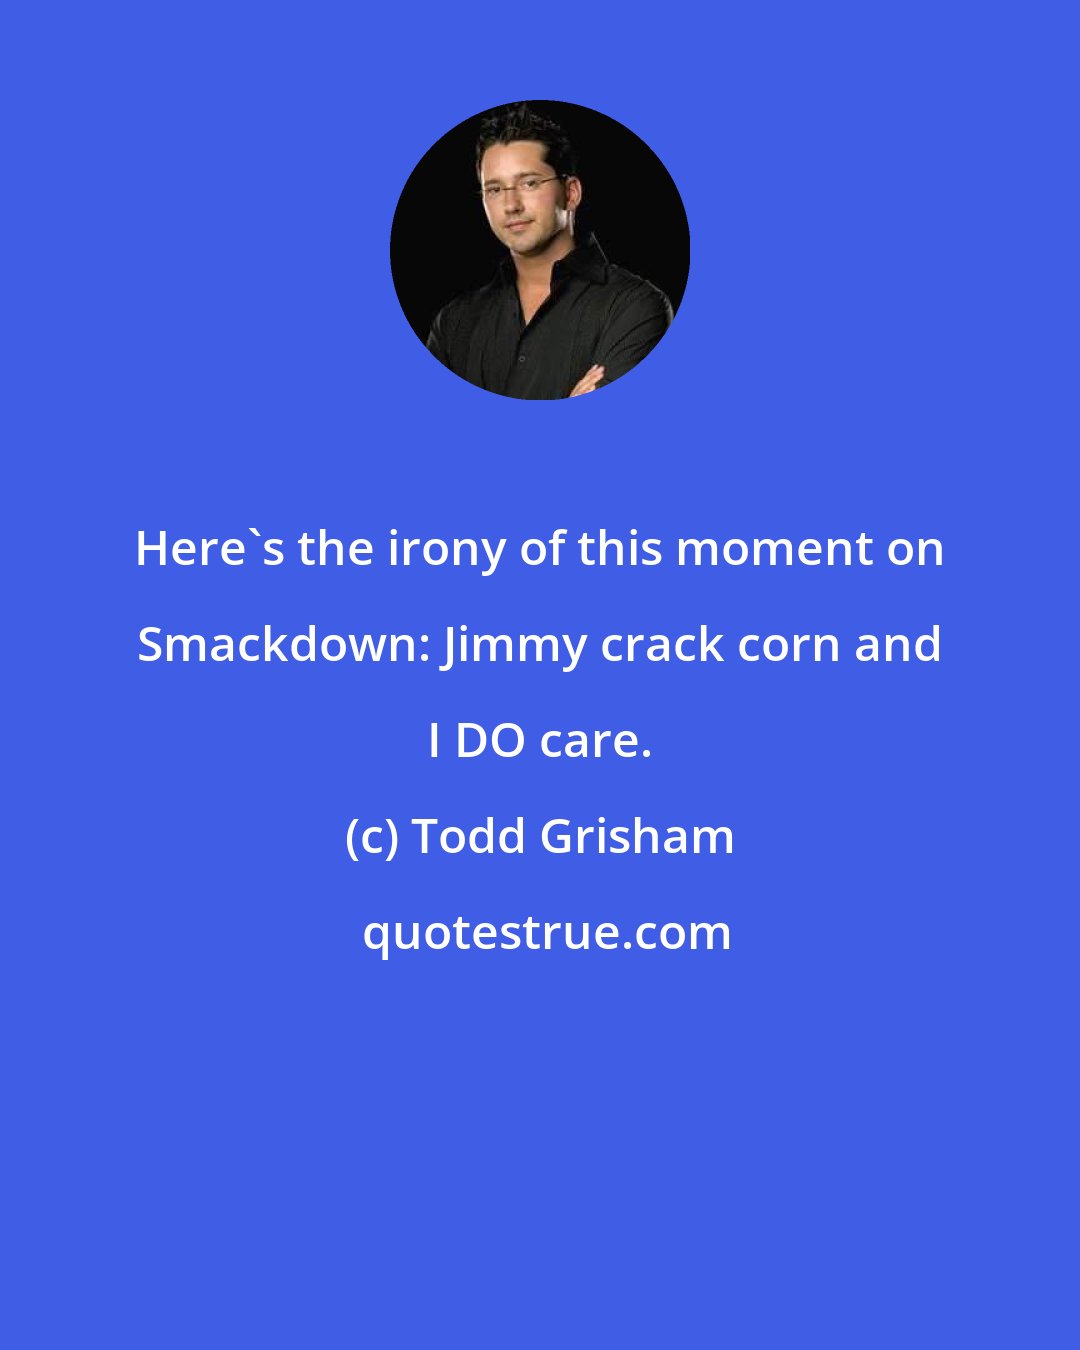 Todd Grisham: Here's the irony of this moment on Smackdown: Jimmy crack corn and I DO care.